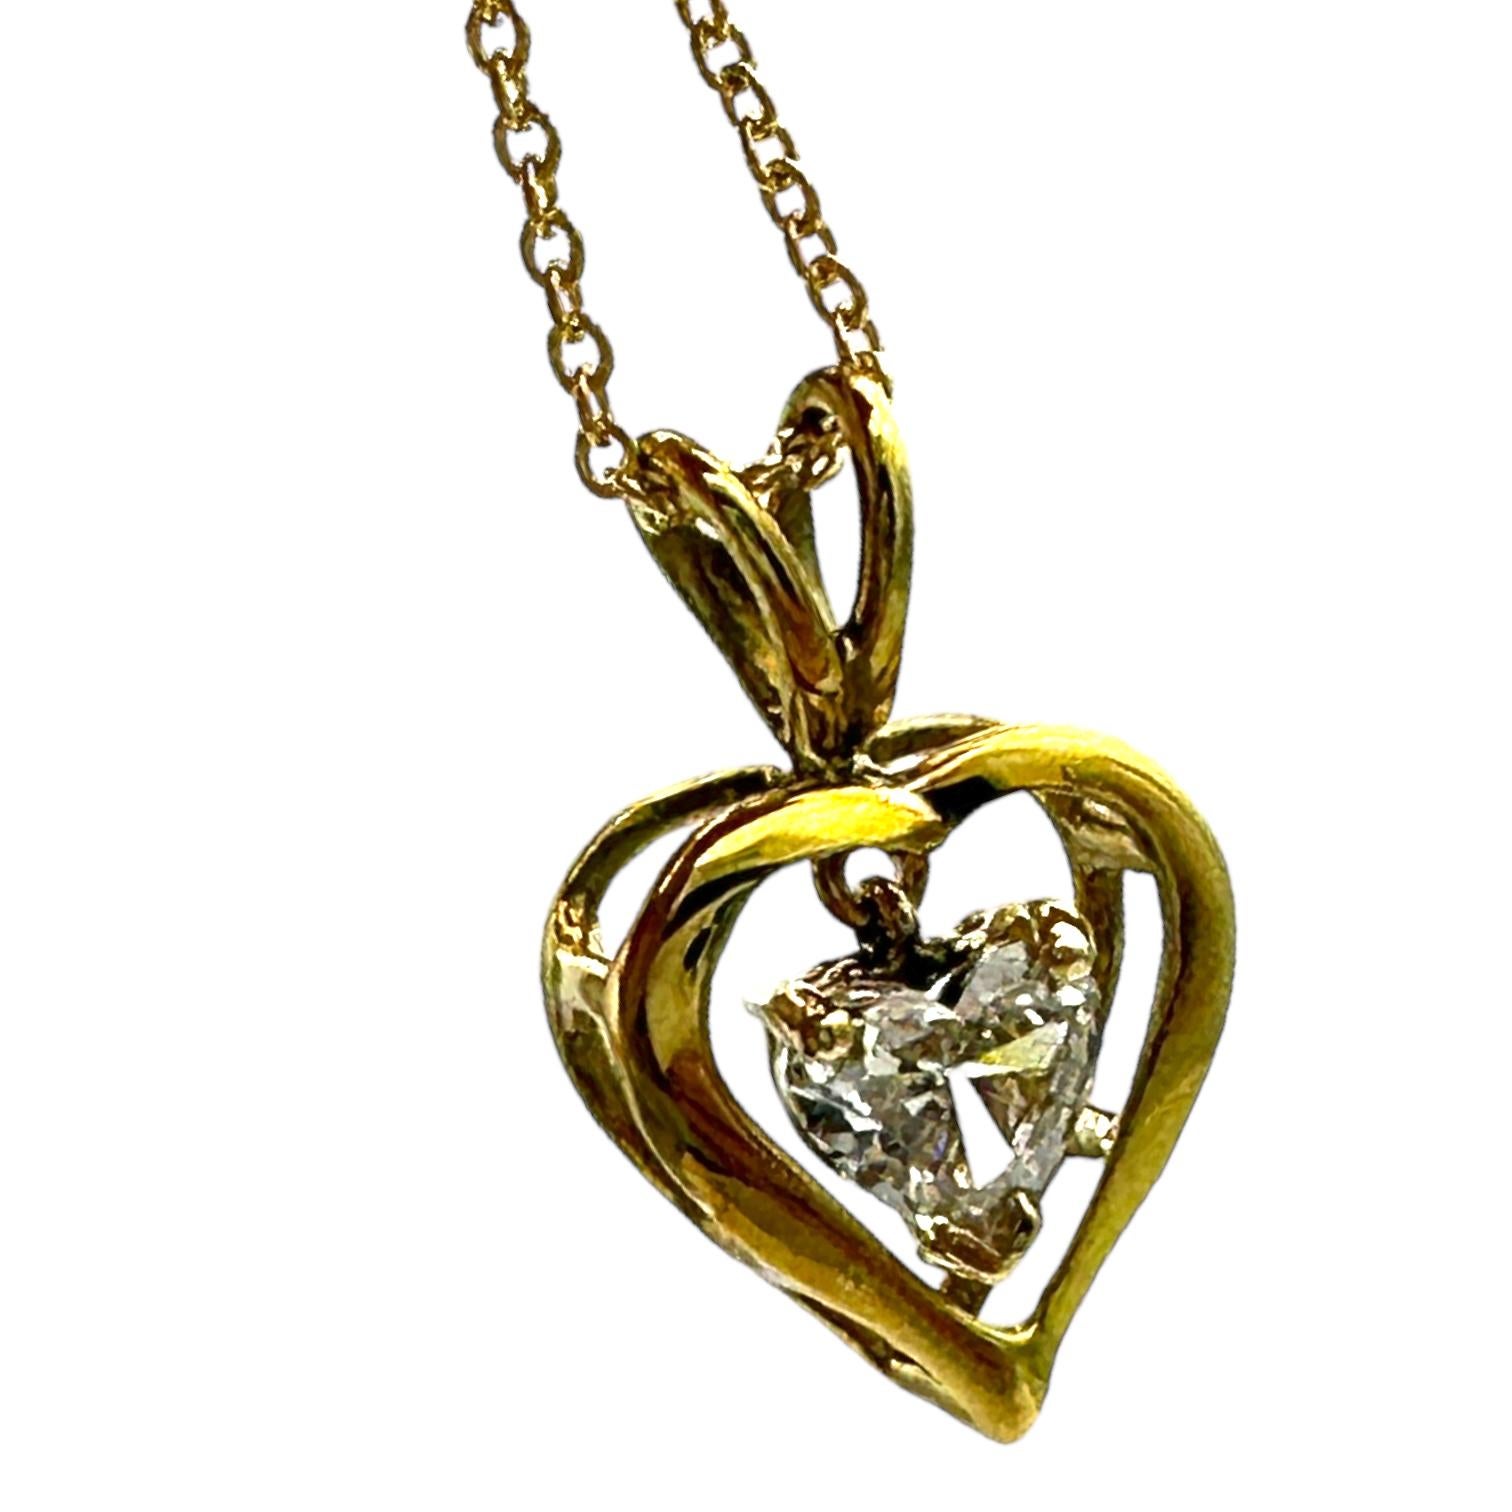 Floating Heart Diamond Pendant showcases a heart-shaped diamond! The diamond weight is .35 Carats. 
The pendant is very sweet, with the diamond dangles inside the larger heart, which measures 3/4 